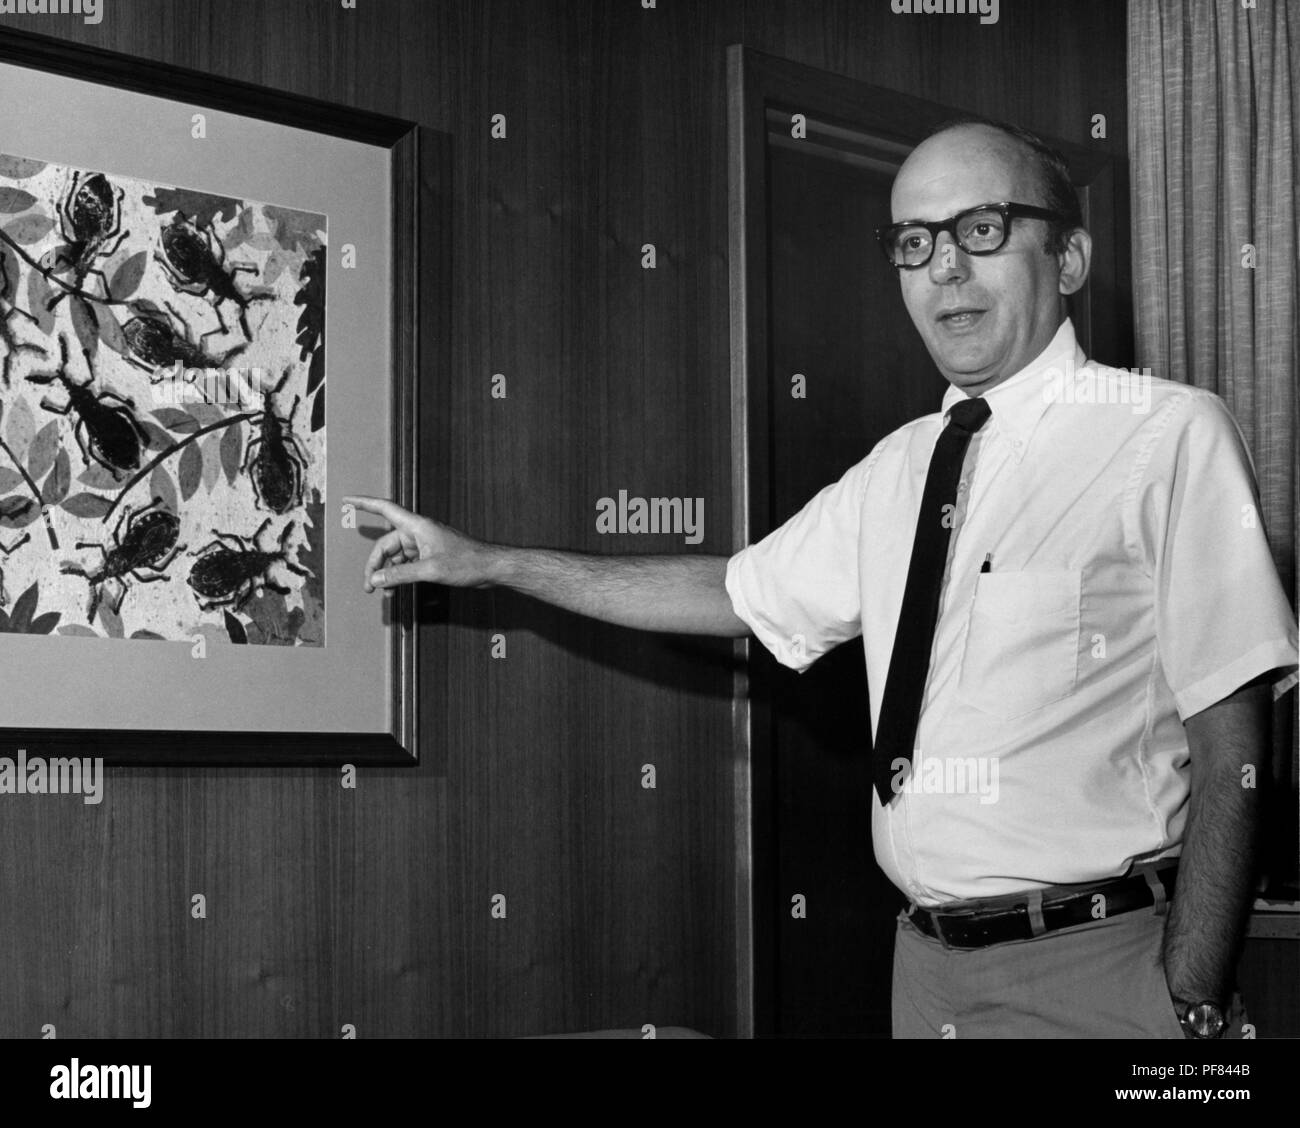 Former Centers for Disease Control (CDC) Director Dr David J Sencer pointing to a piece of artwork, 1970. Image courtesy Centers for Disease Control / Betty Loy. () Stock Photo